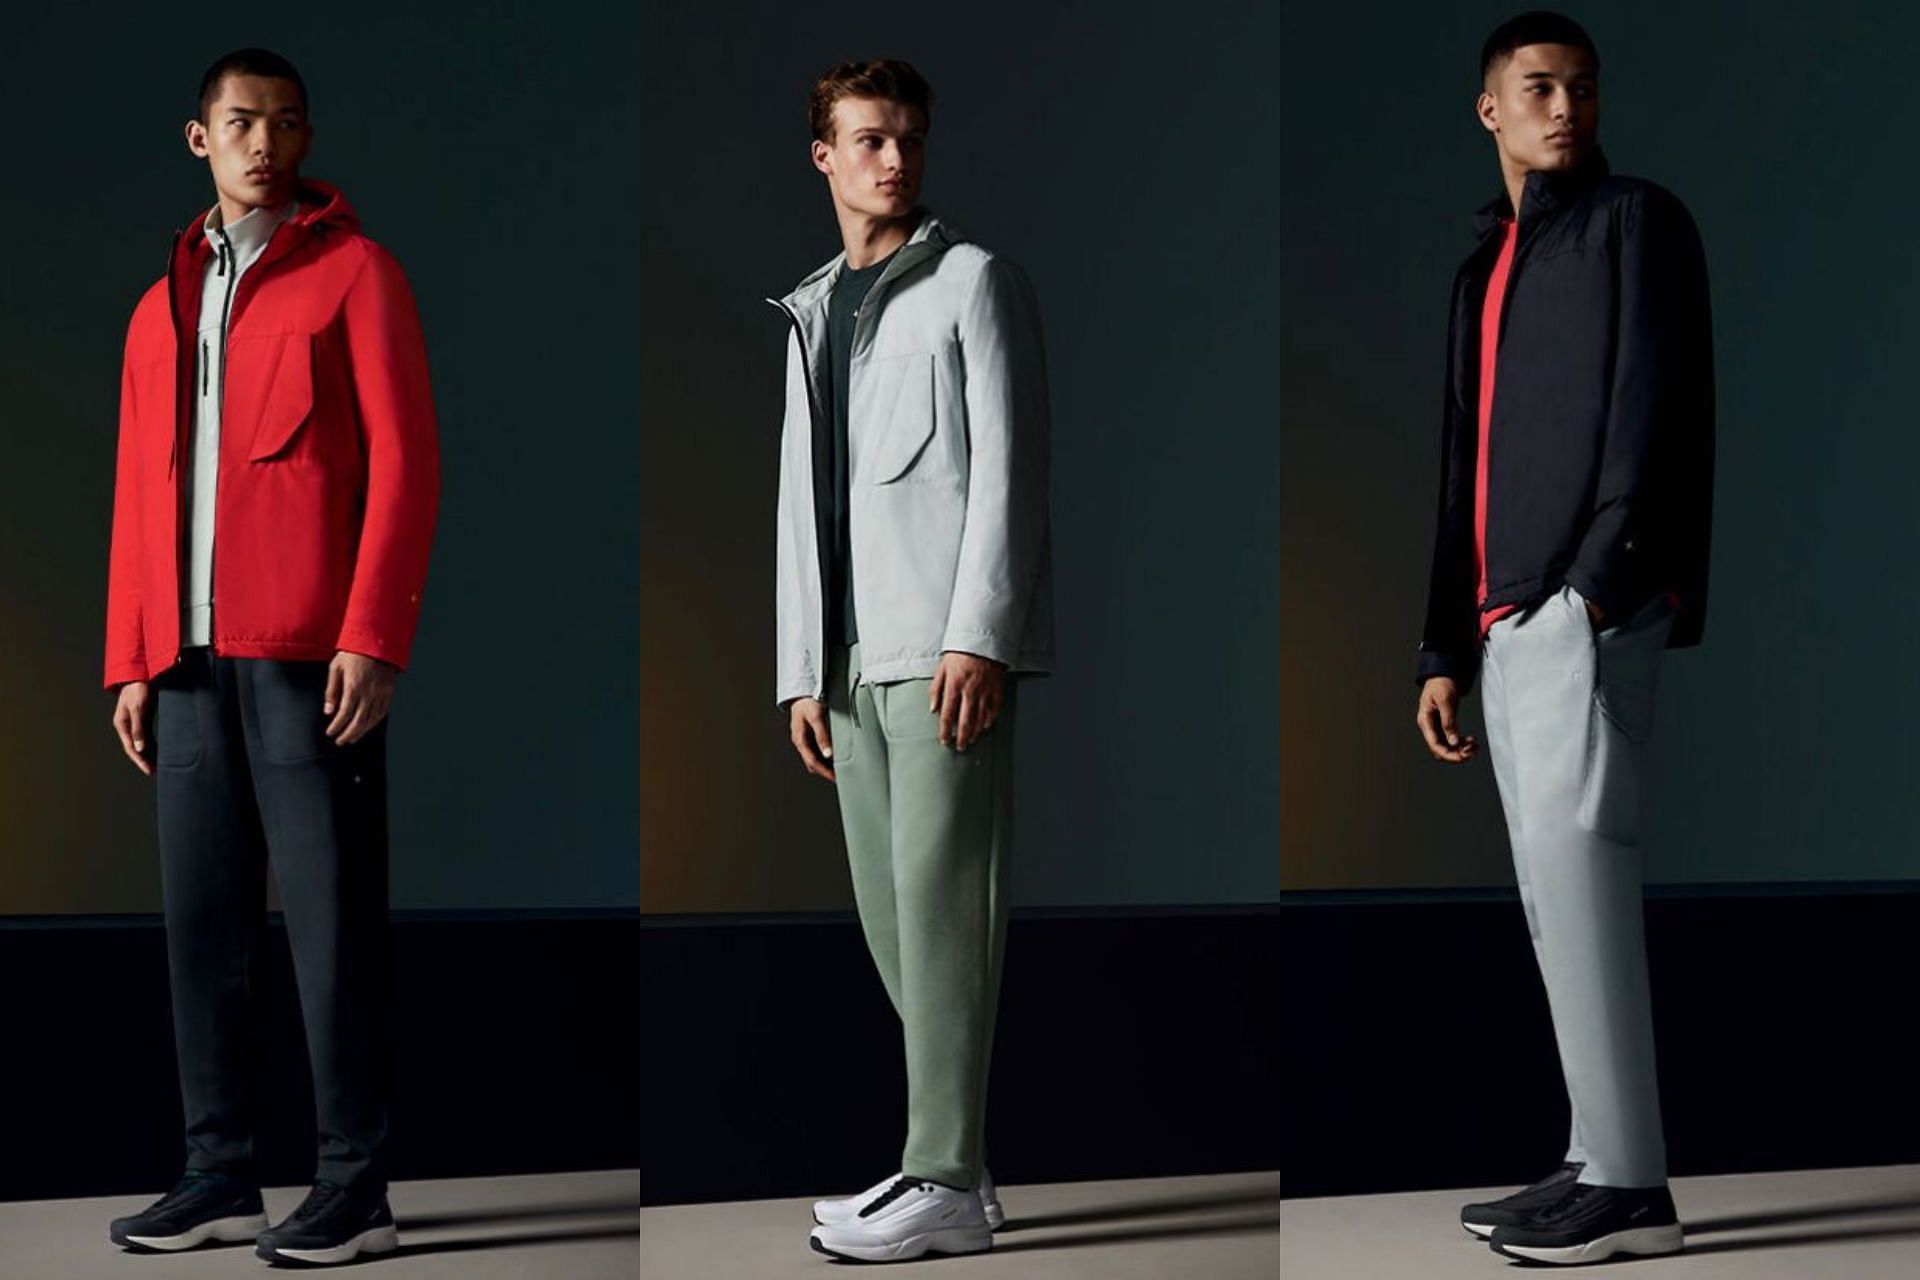 Jackets are offered in different color options (Image via StoneIsland.com)